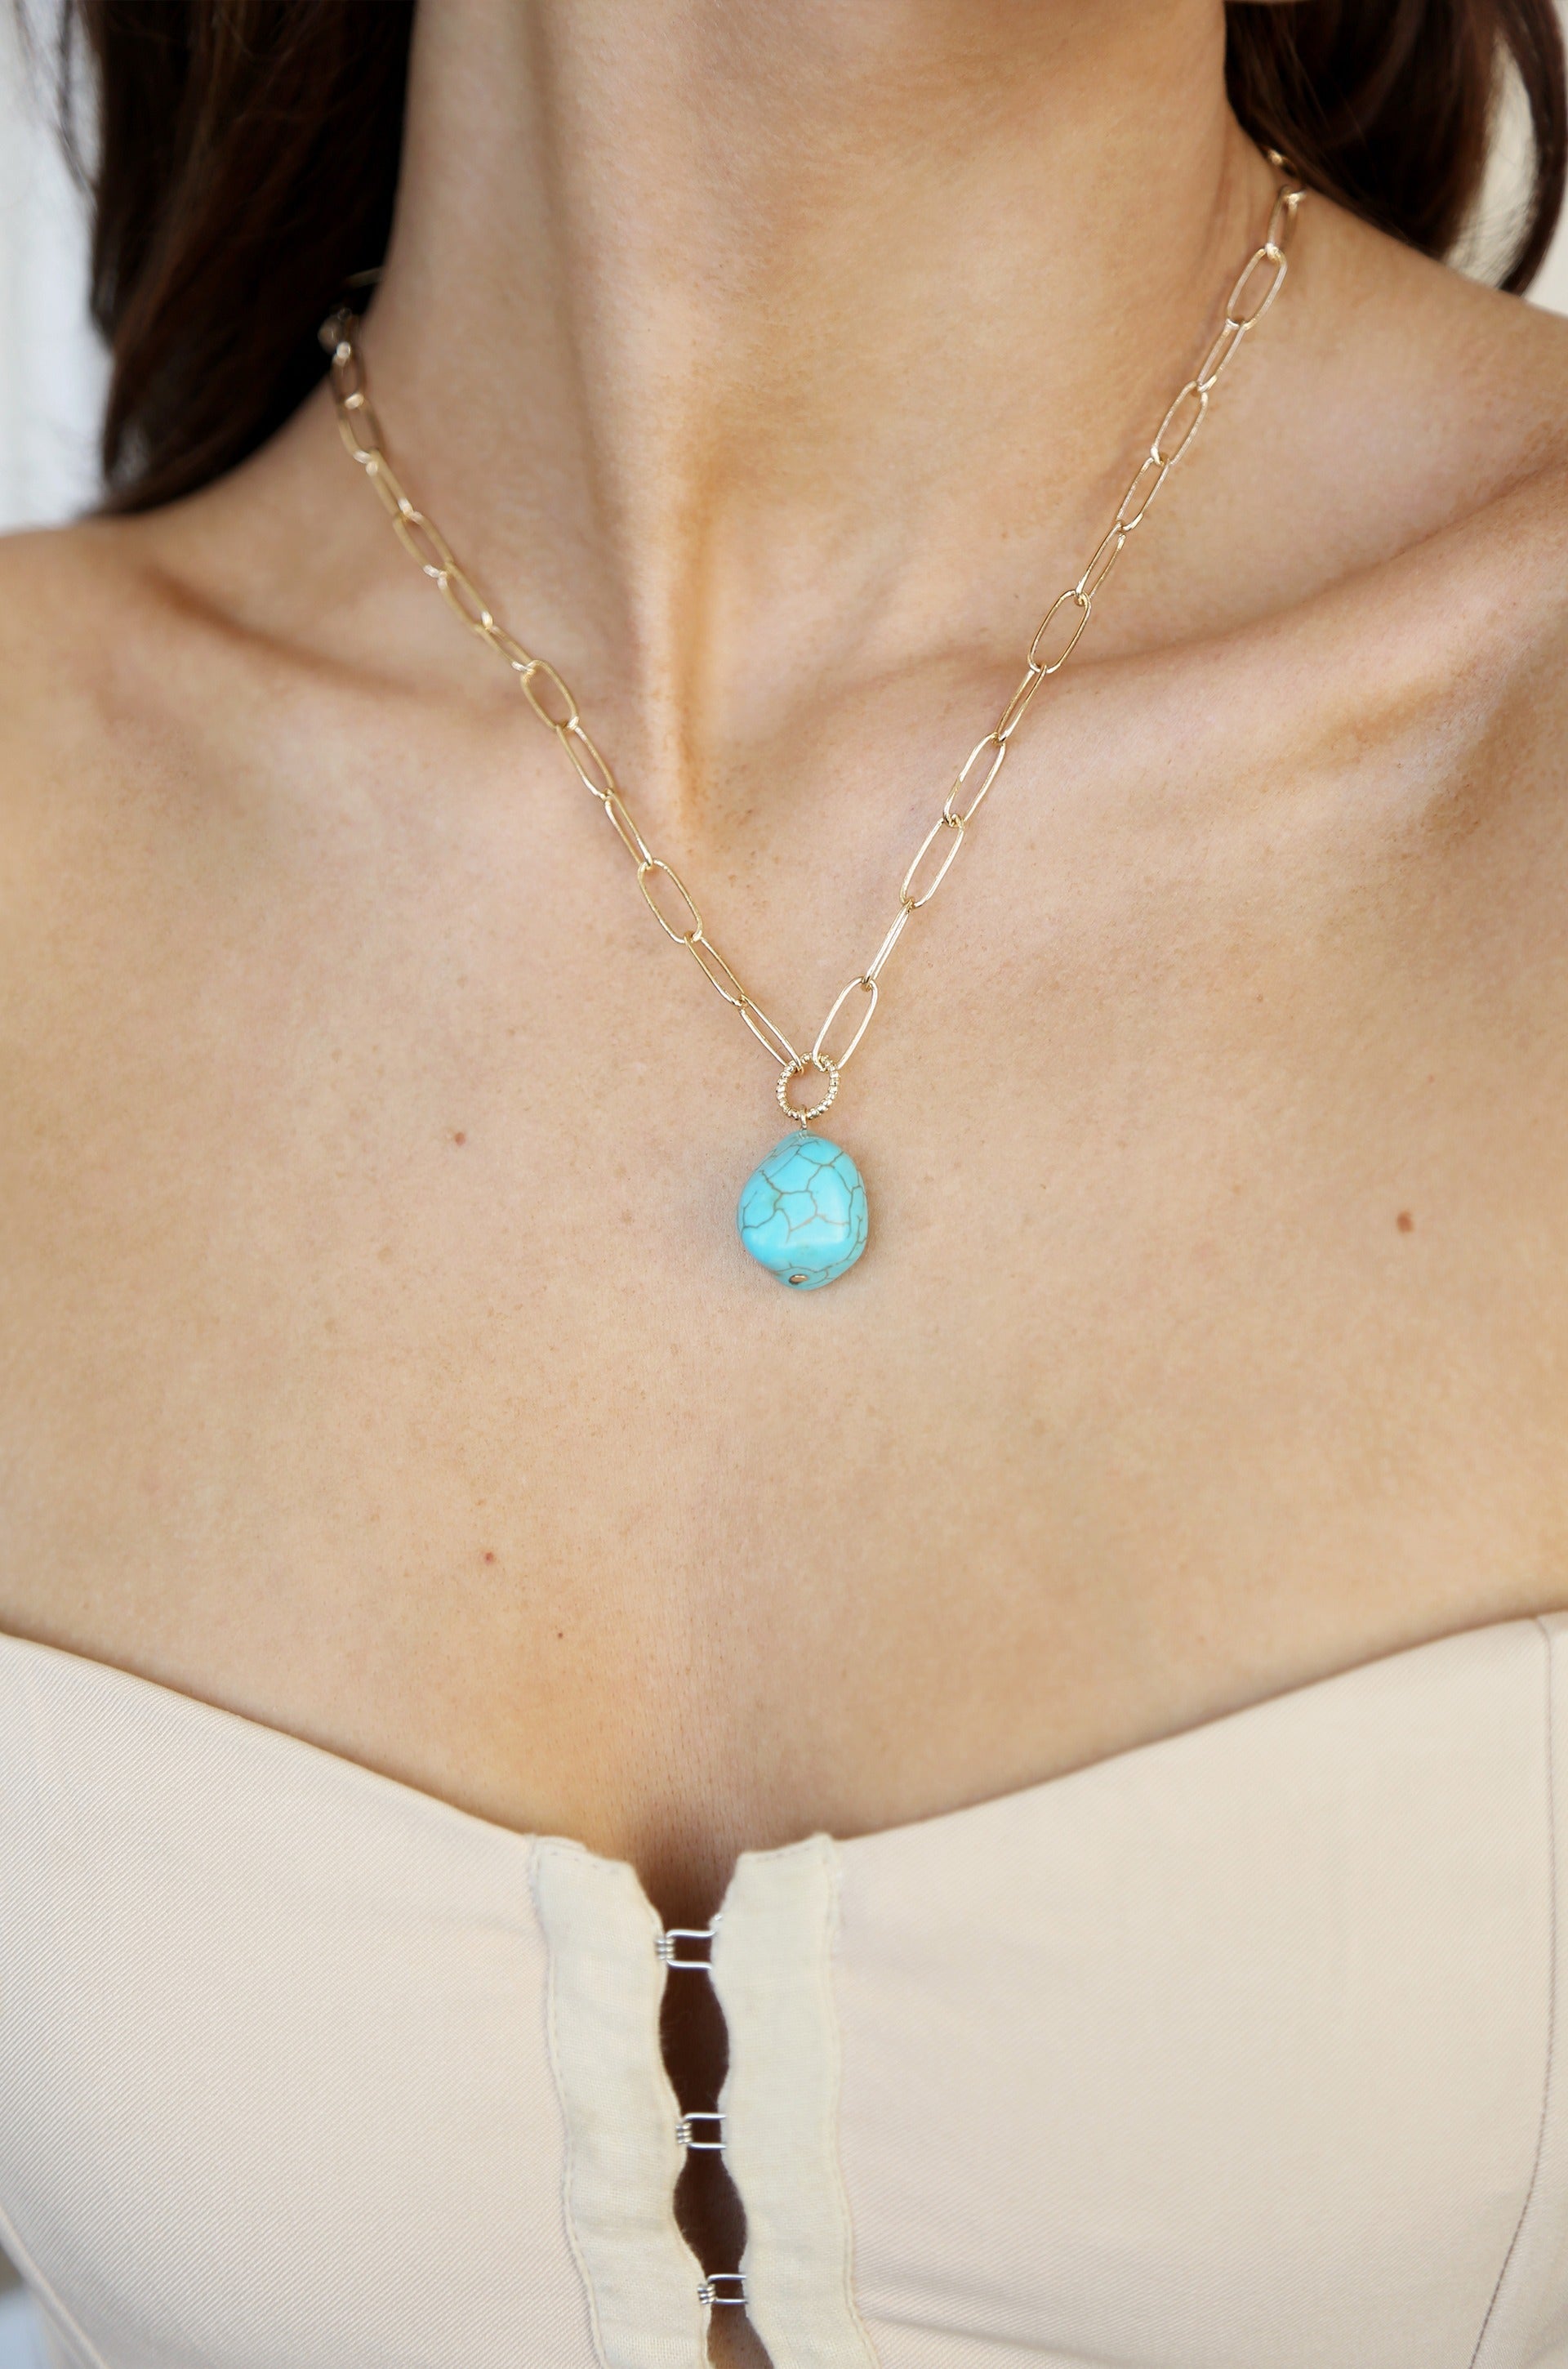 Single Pearl Open Links 18k Gold Plated Chain Necklace in turquoise on model